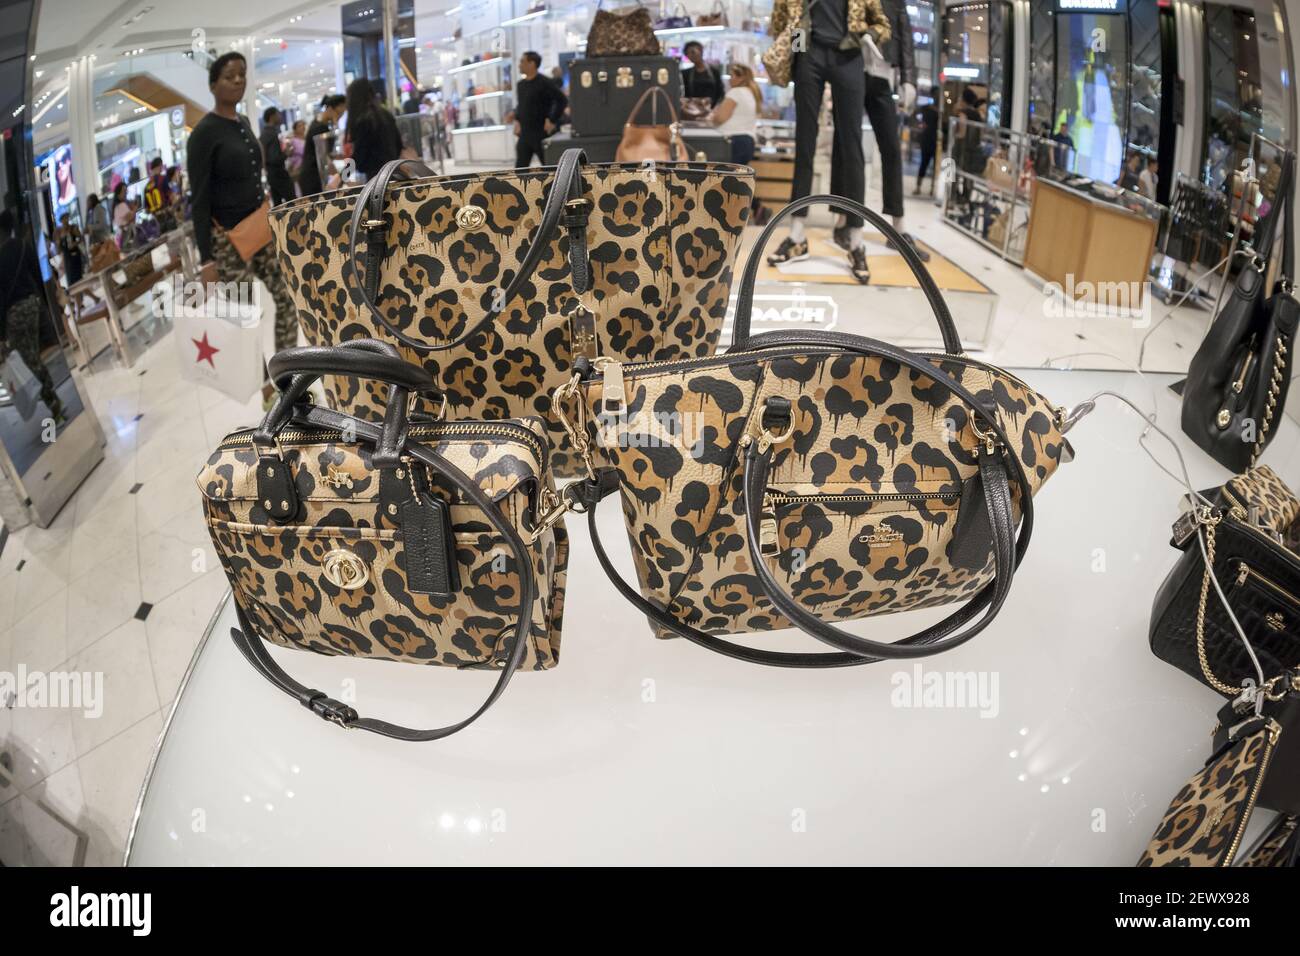 Coach handbags on display at the Coach boutique within Macy's in New York  on Tuesday, August 4, 2015. Luxury leather goods retailer Coach has bought  handbag and women's apparel retailer Kate Spade